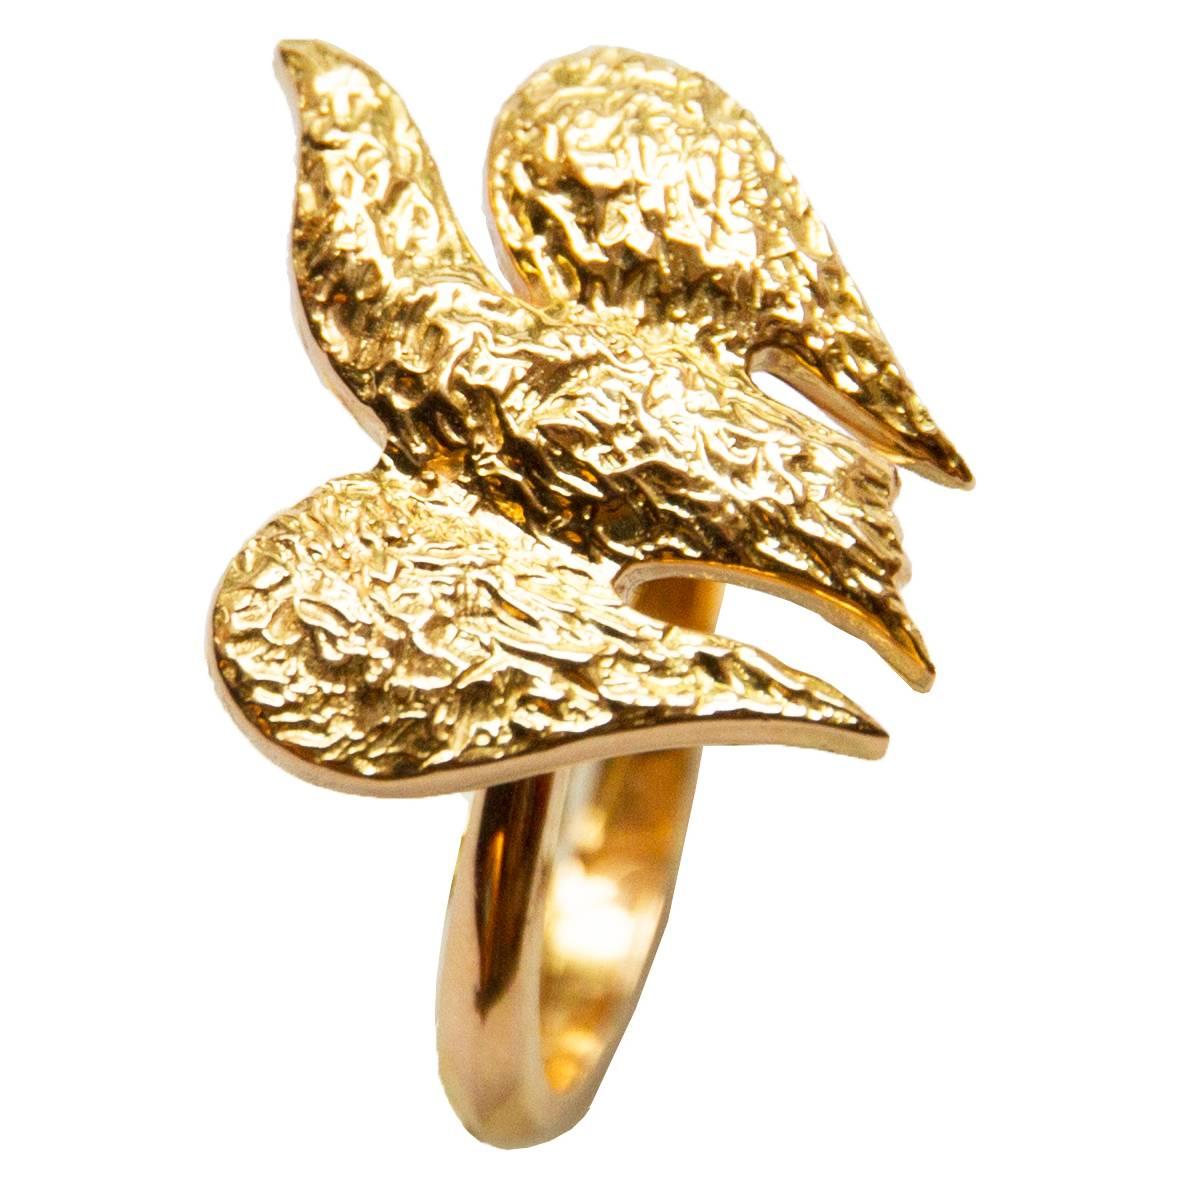 1963 Georges Braque Gold "Lachesis" Ring